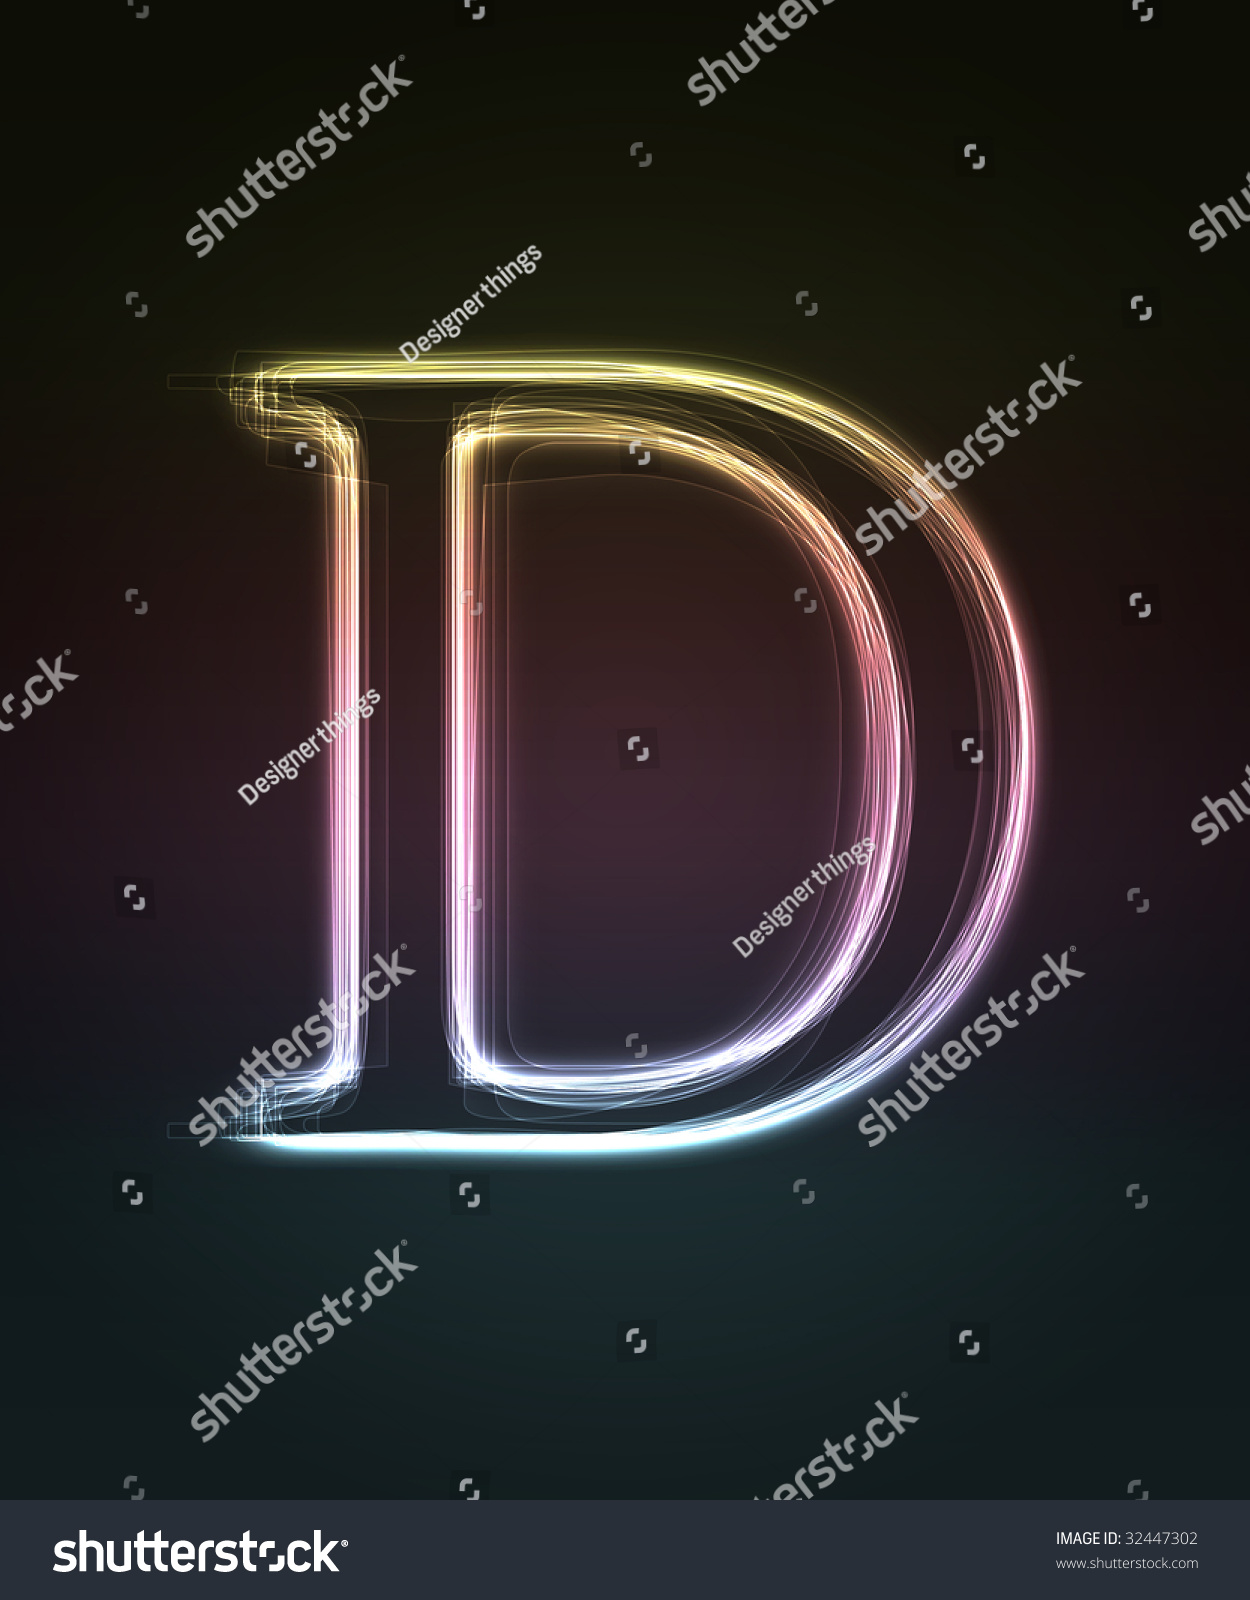 Glowing Font. Shiny Letter D. Stock Photo 32447302 : Shutterstock